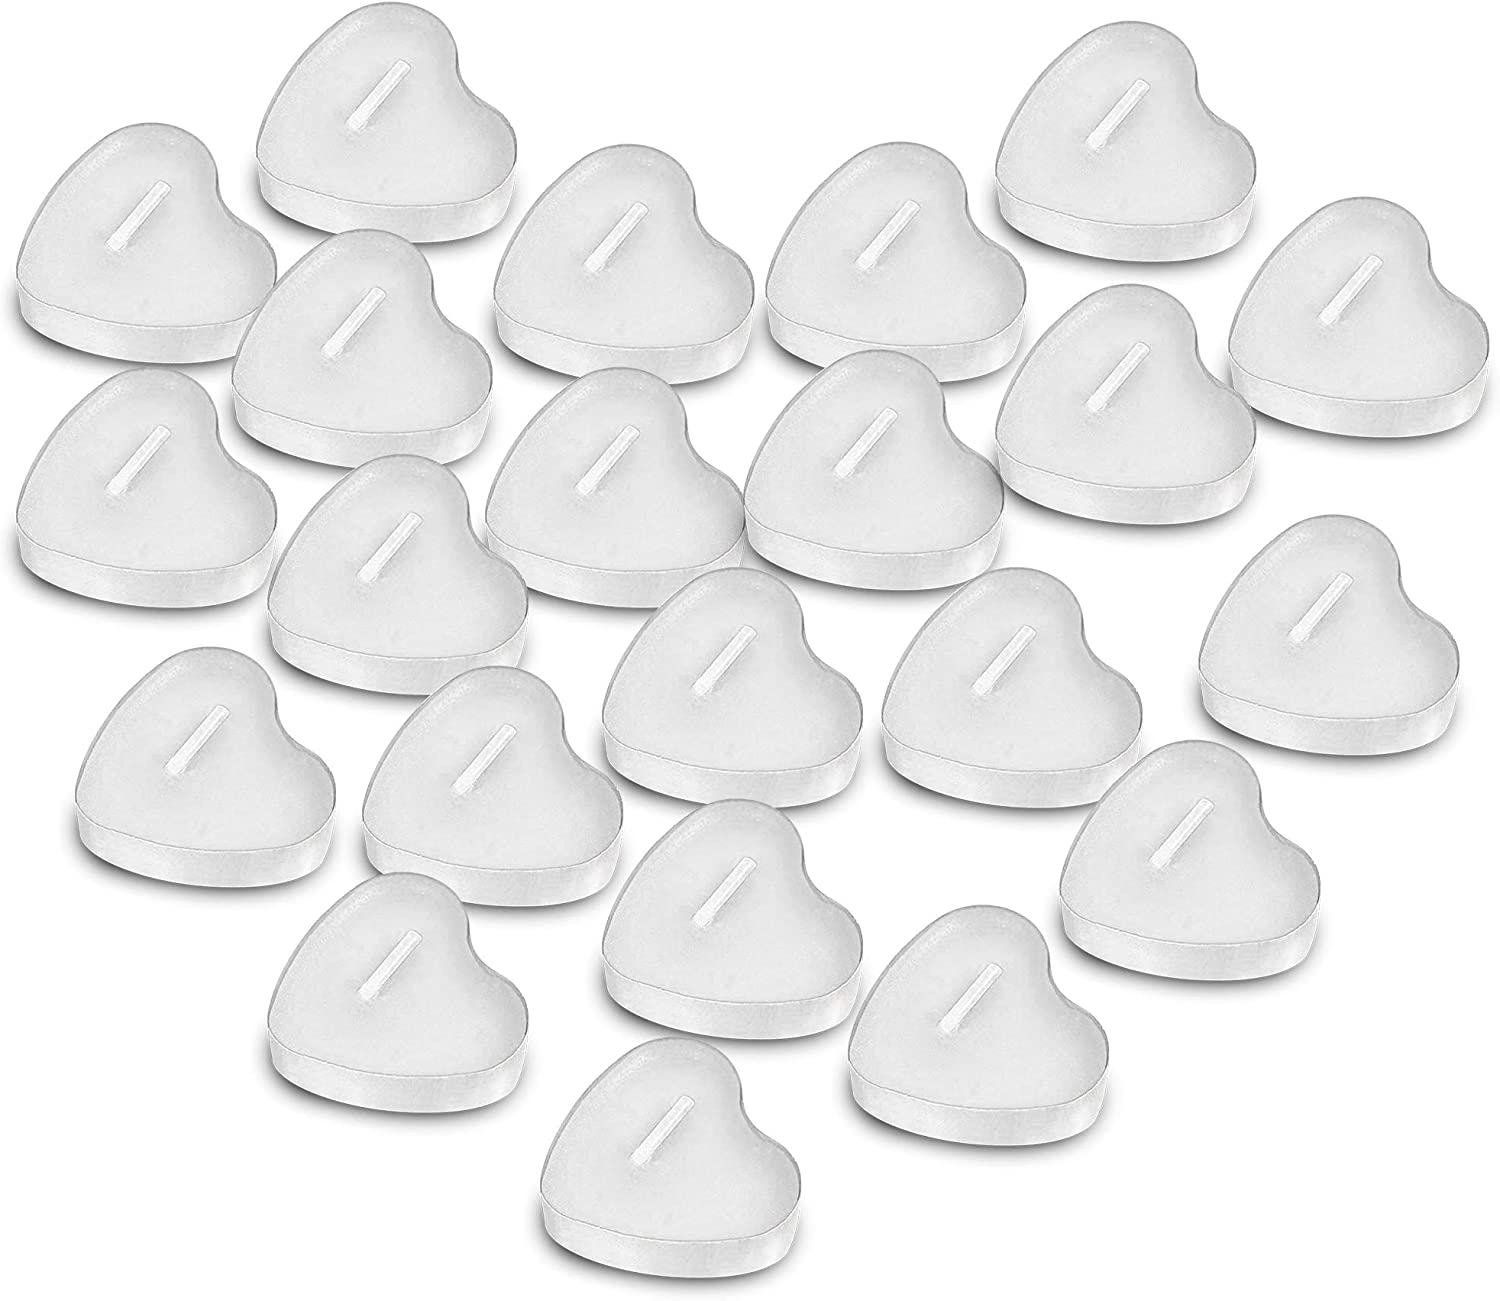 100 Pieces Heart Shape Candles Romantic Love Candle Tealight